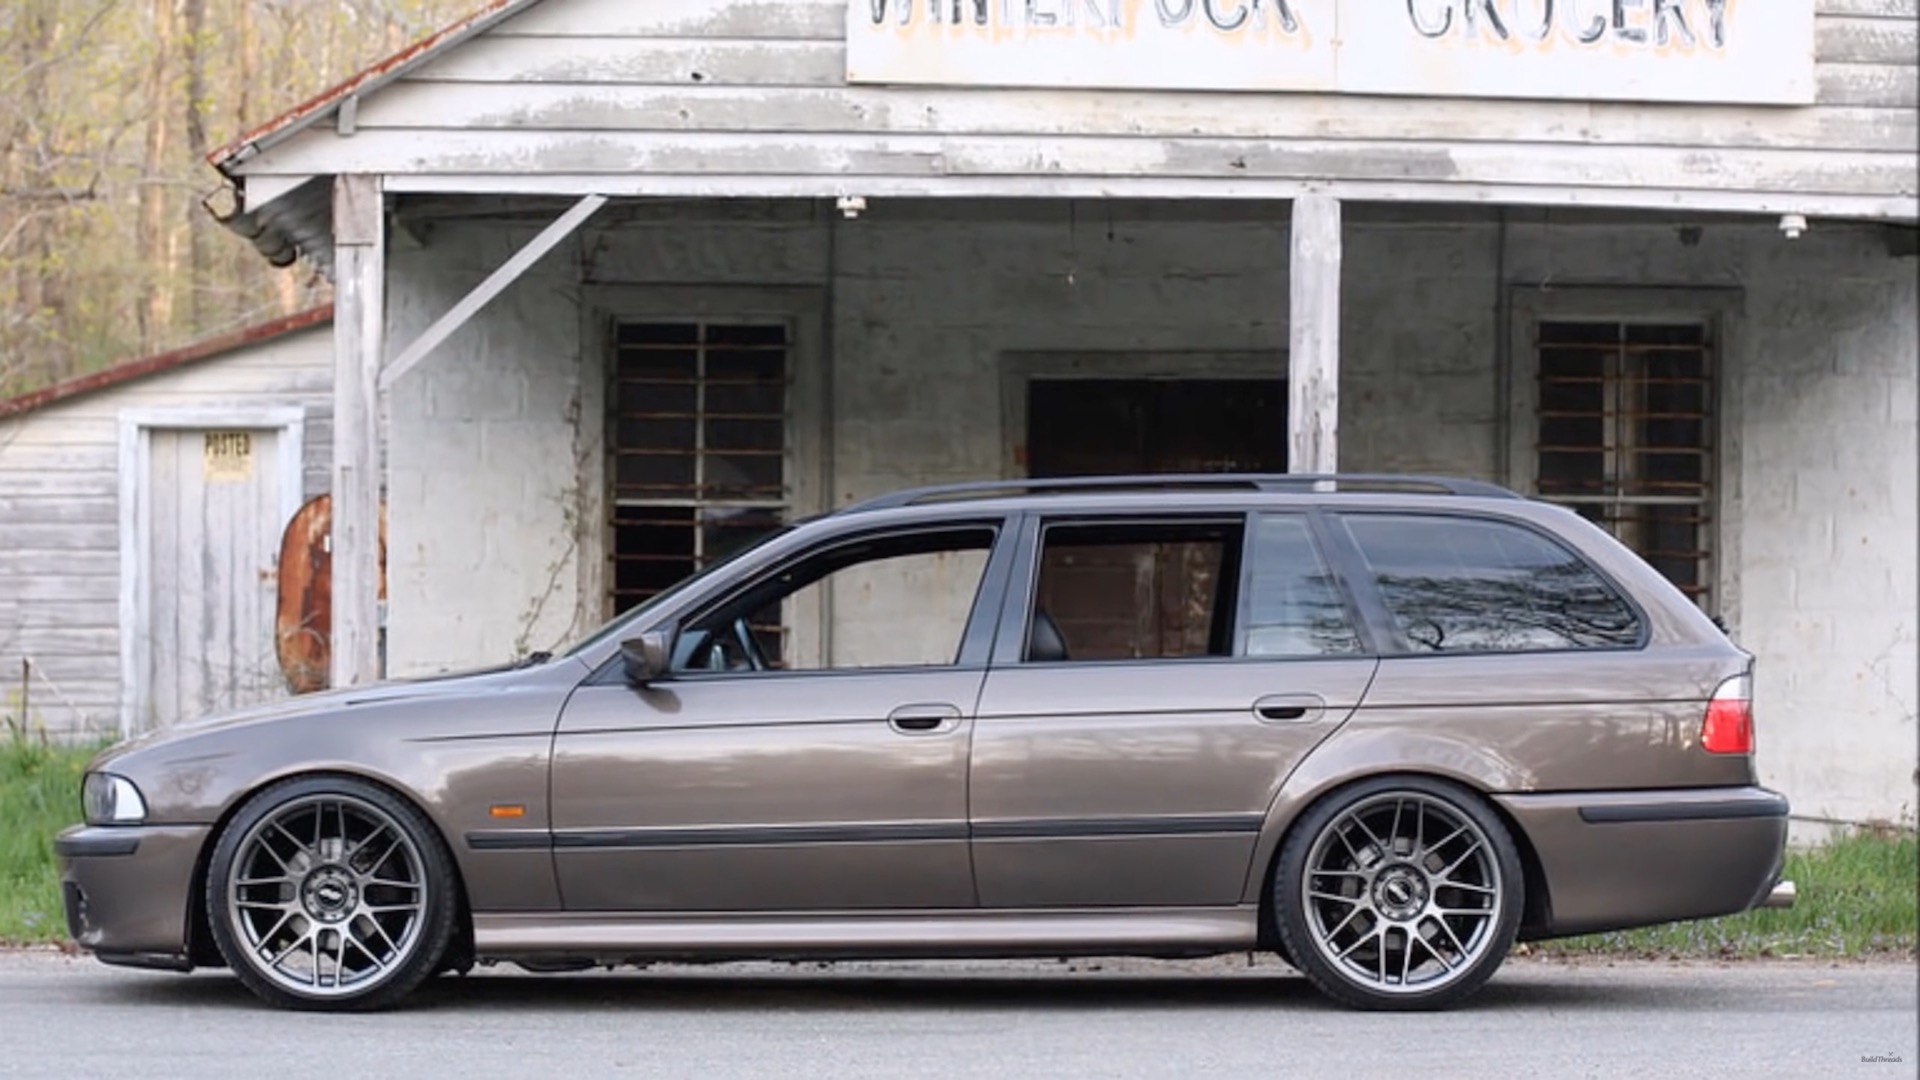 A Restomod Video Showing A BMW E39 Touring With A New LS7 Engine